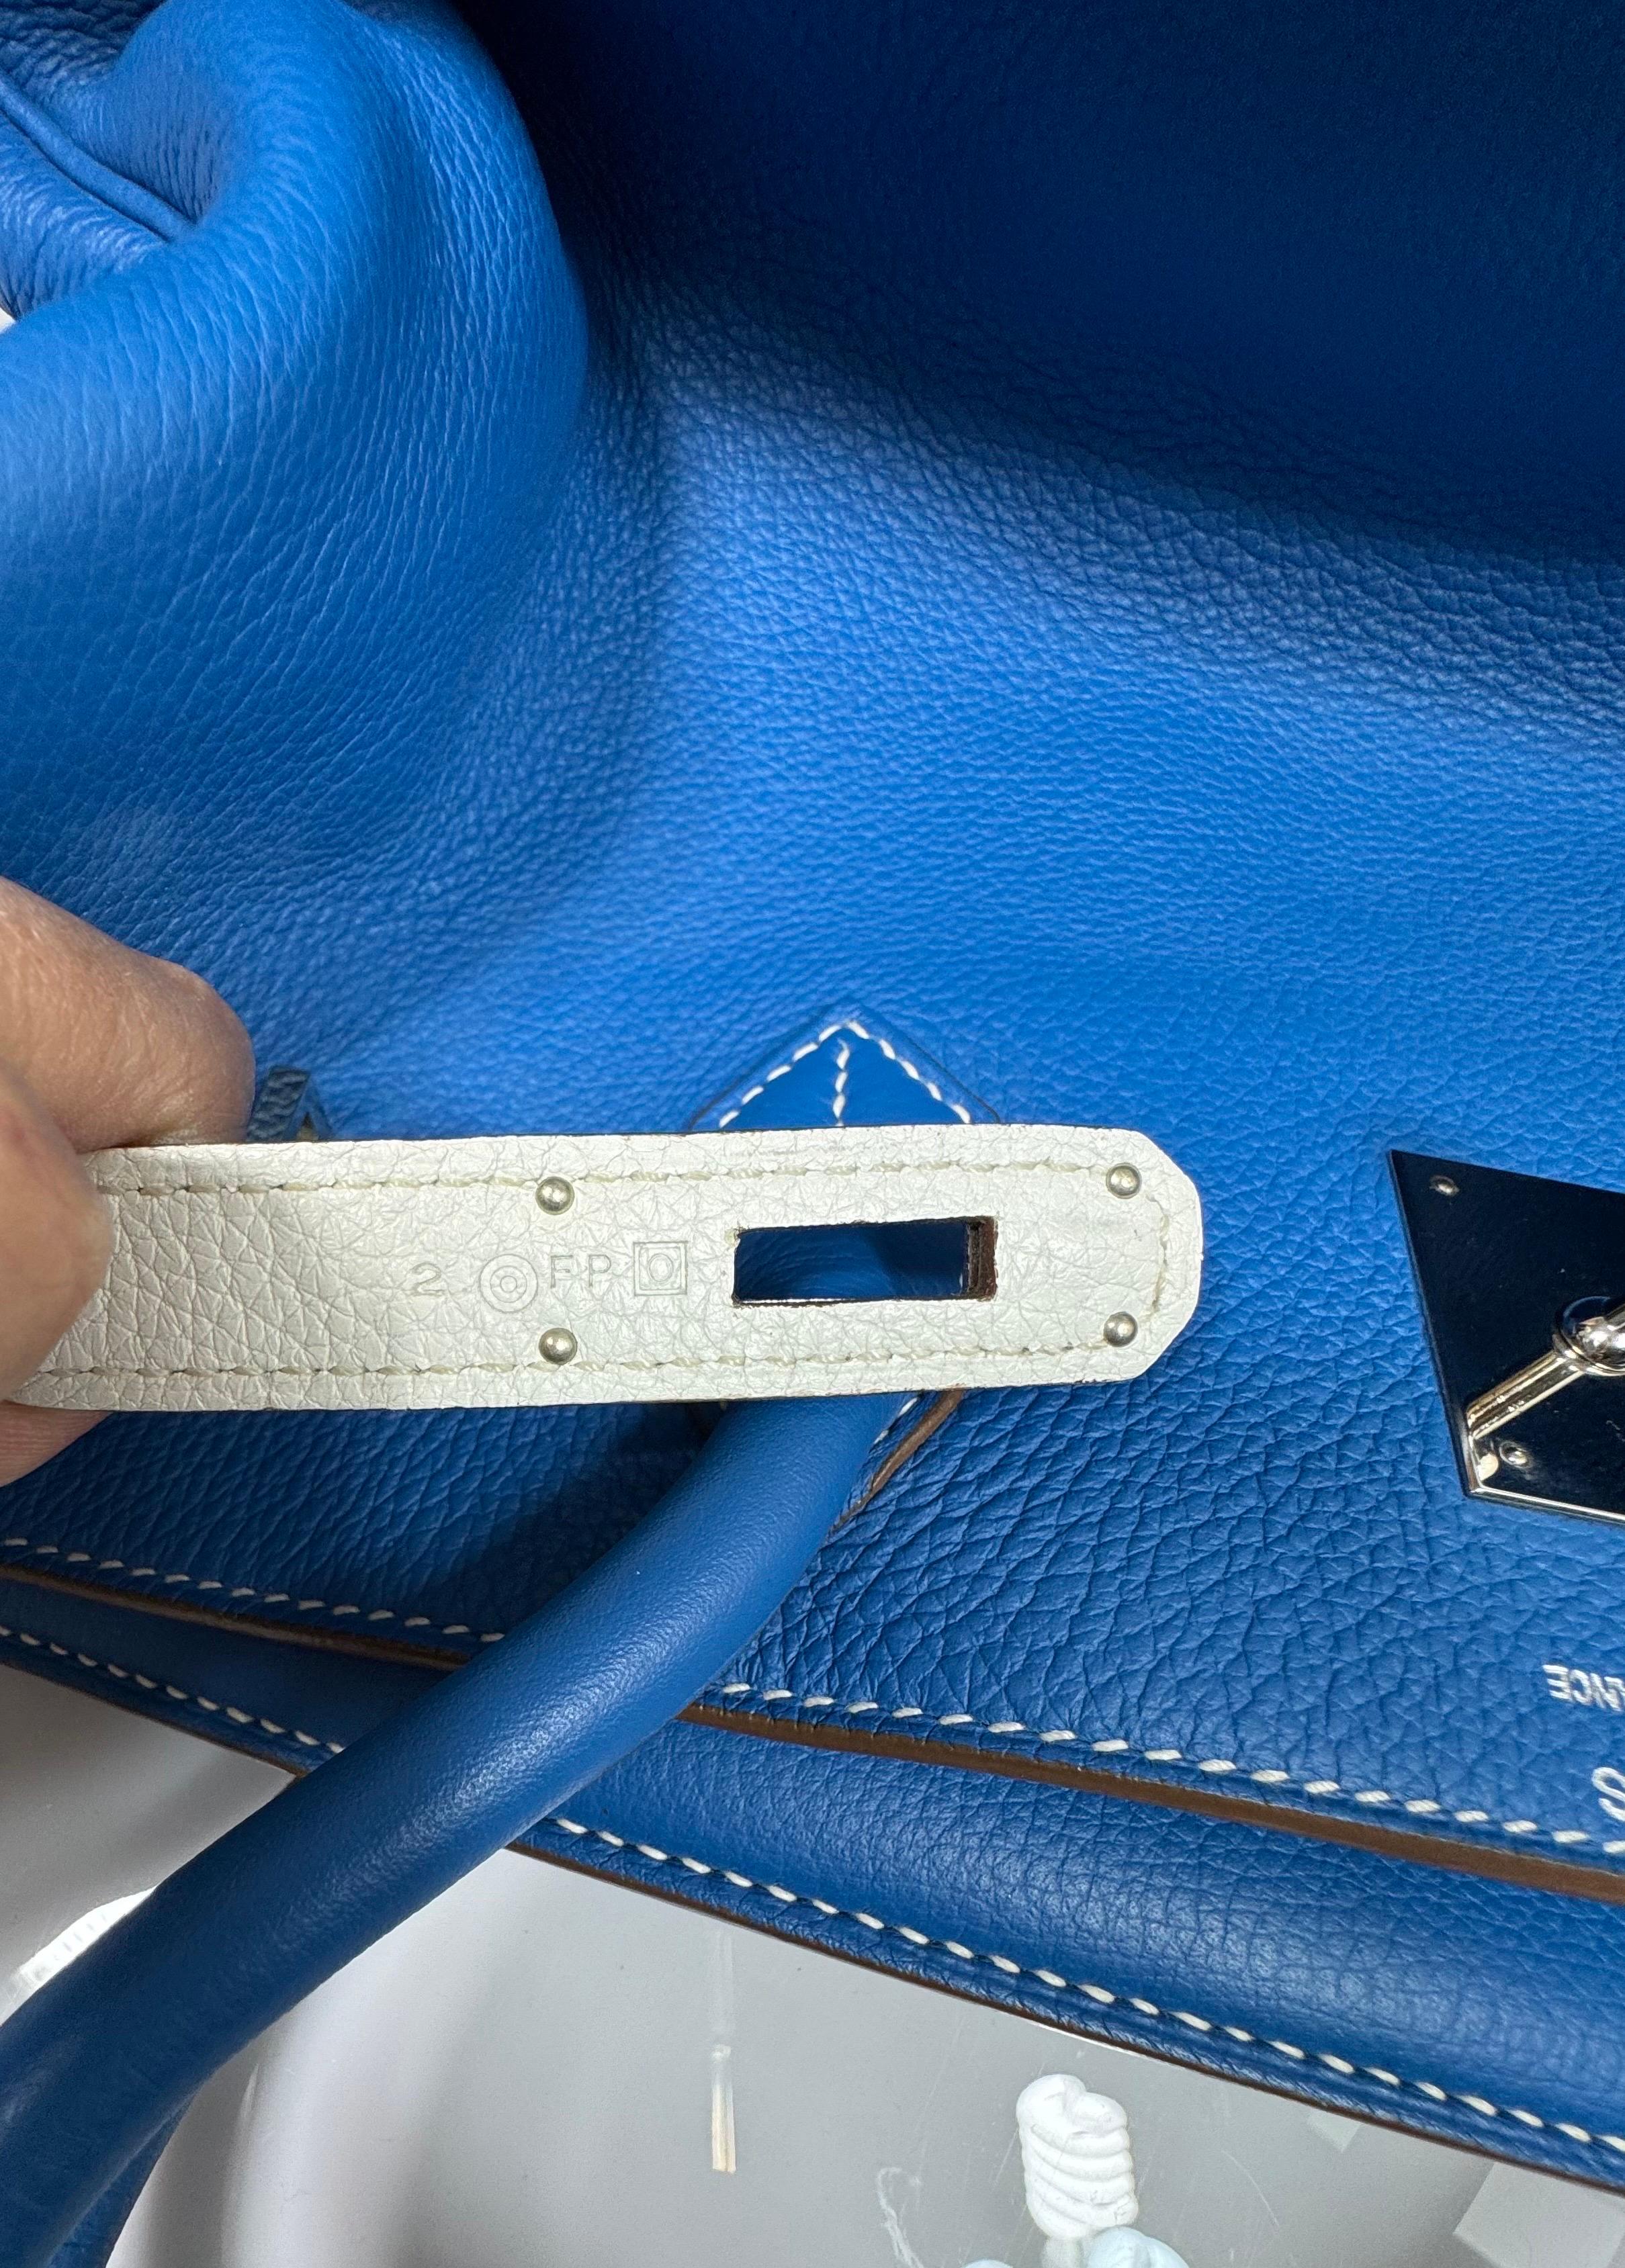 Hermes 40cm  Mykonos Blue and White Clemence Limited edition Birkin-SHW -2011 For Sale 9